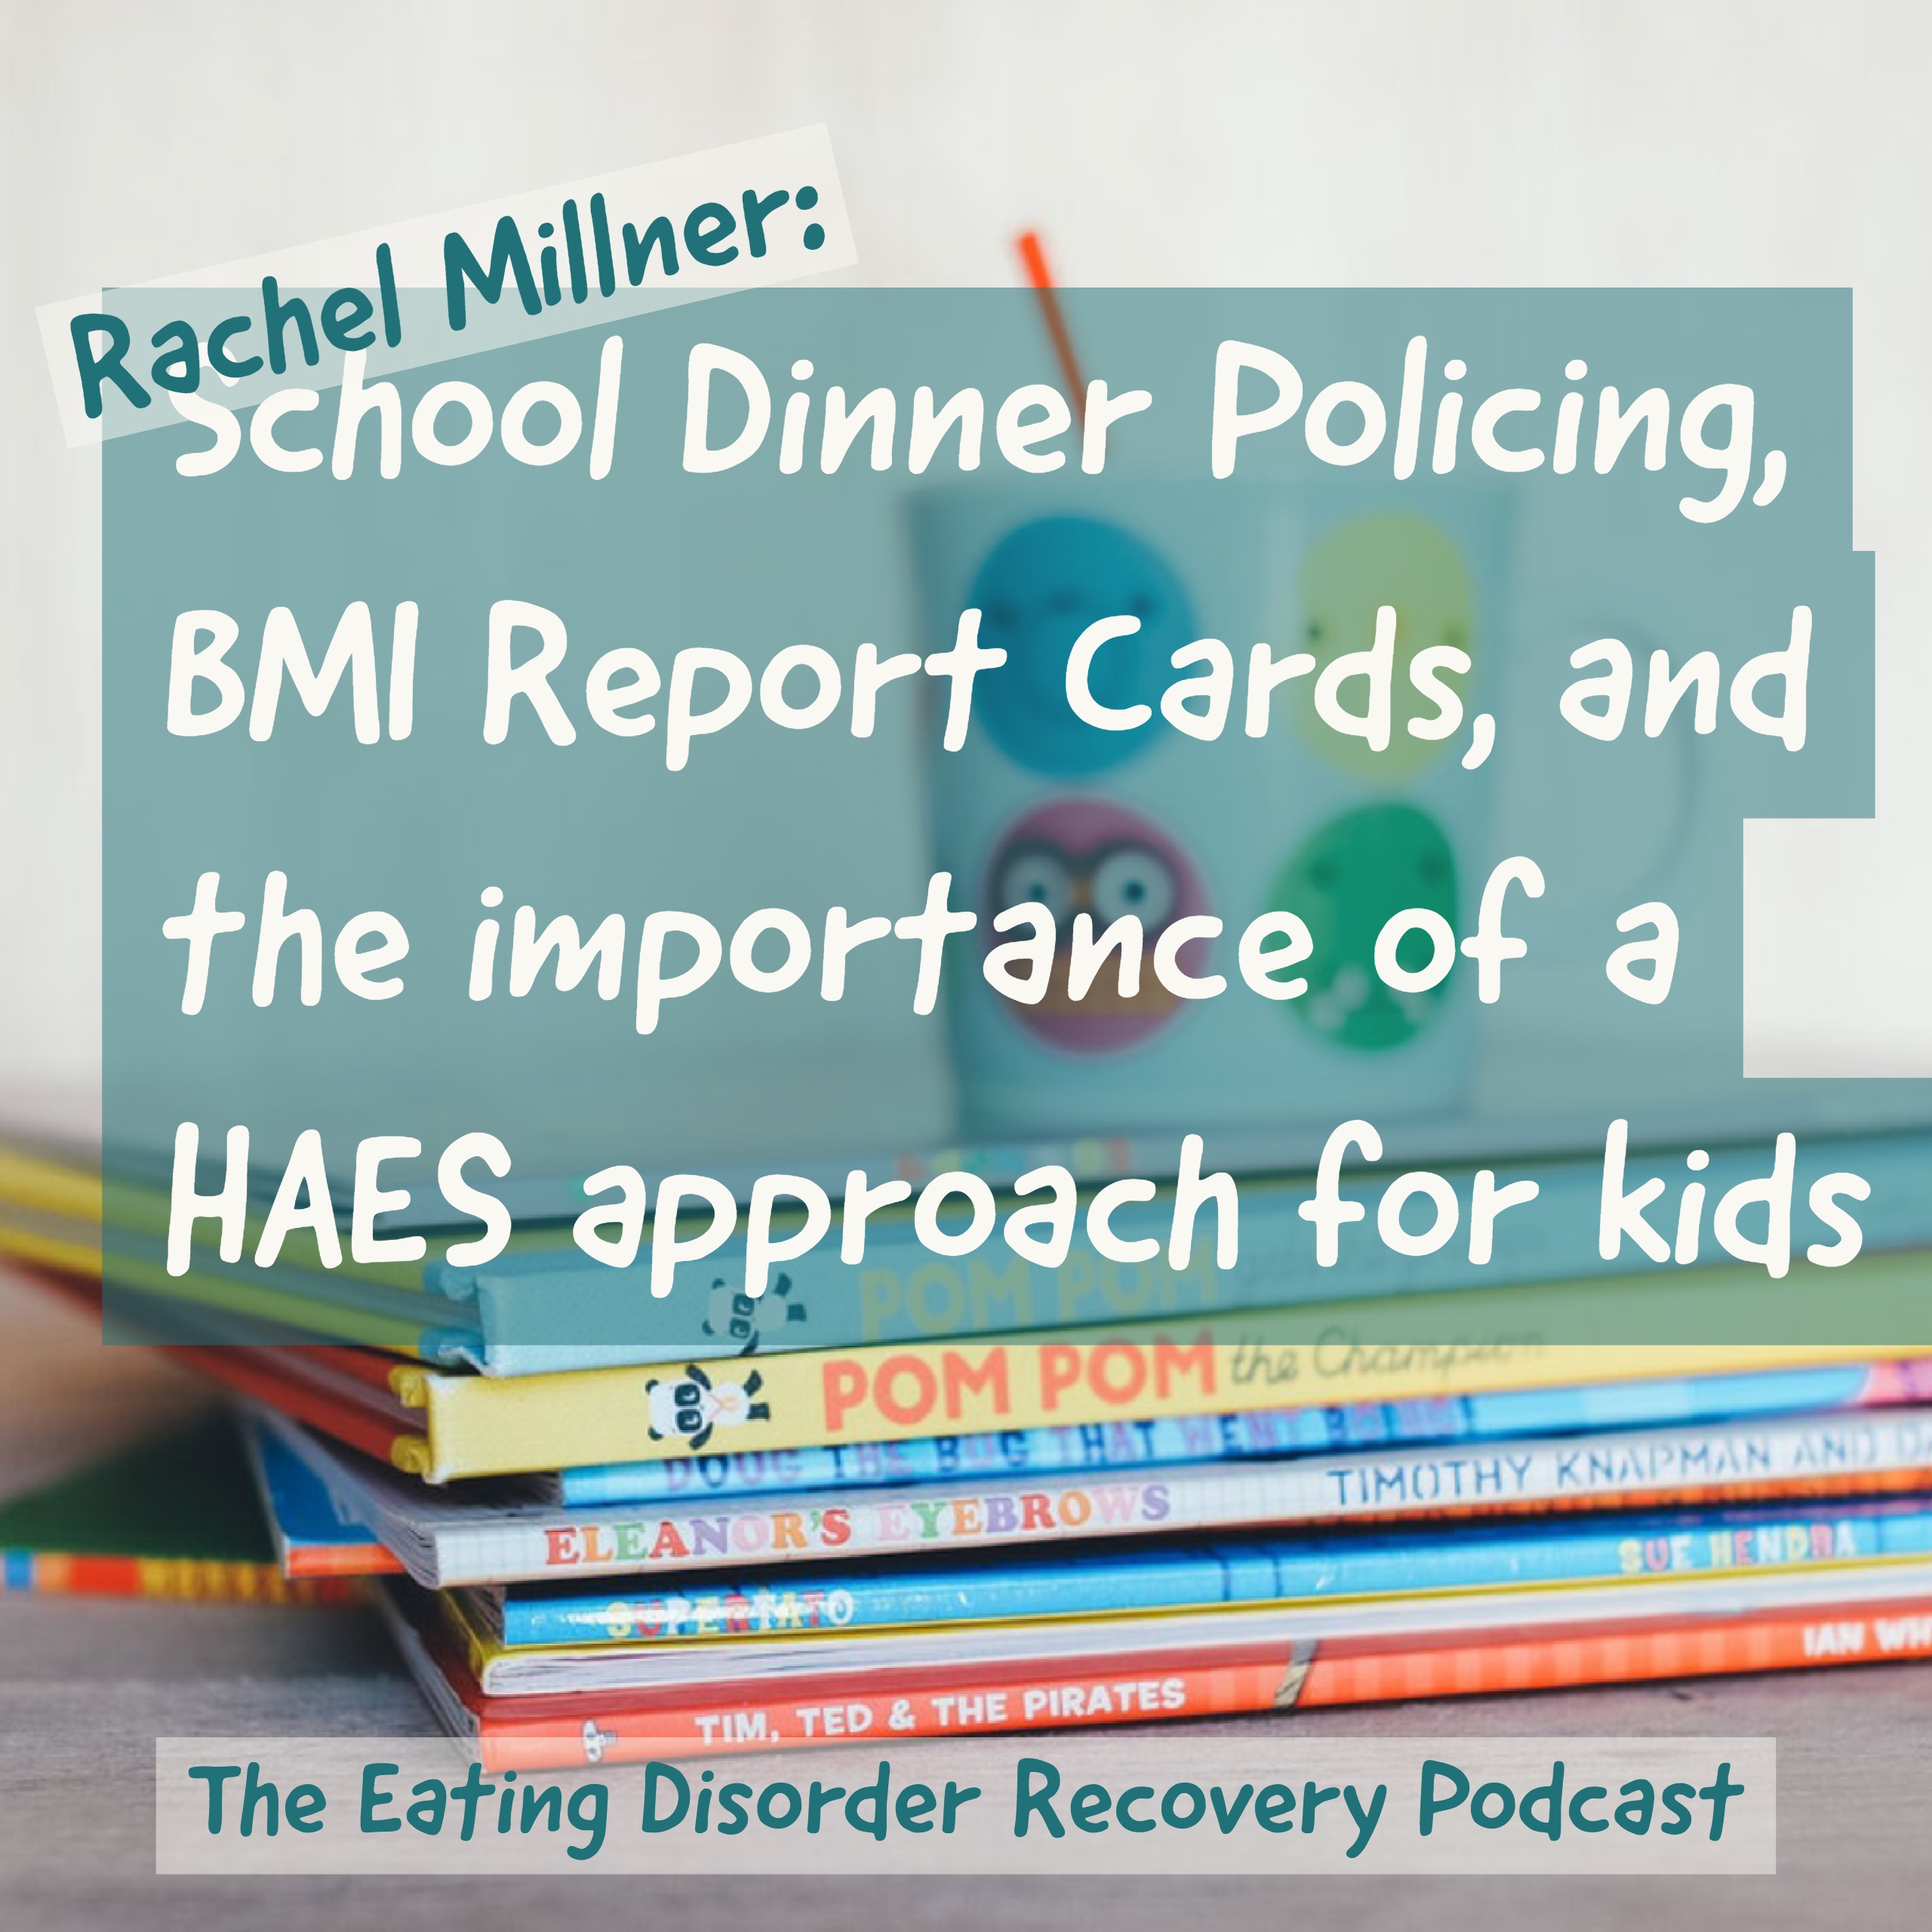 Rachel Millner: School Dinner Policing, BMI Report Cards, and the importance of a HAES approach for kids